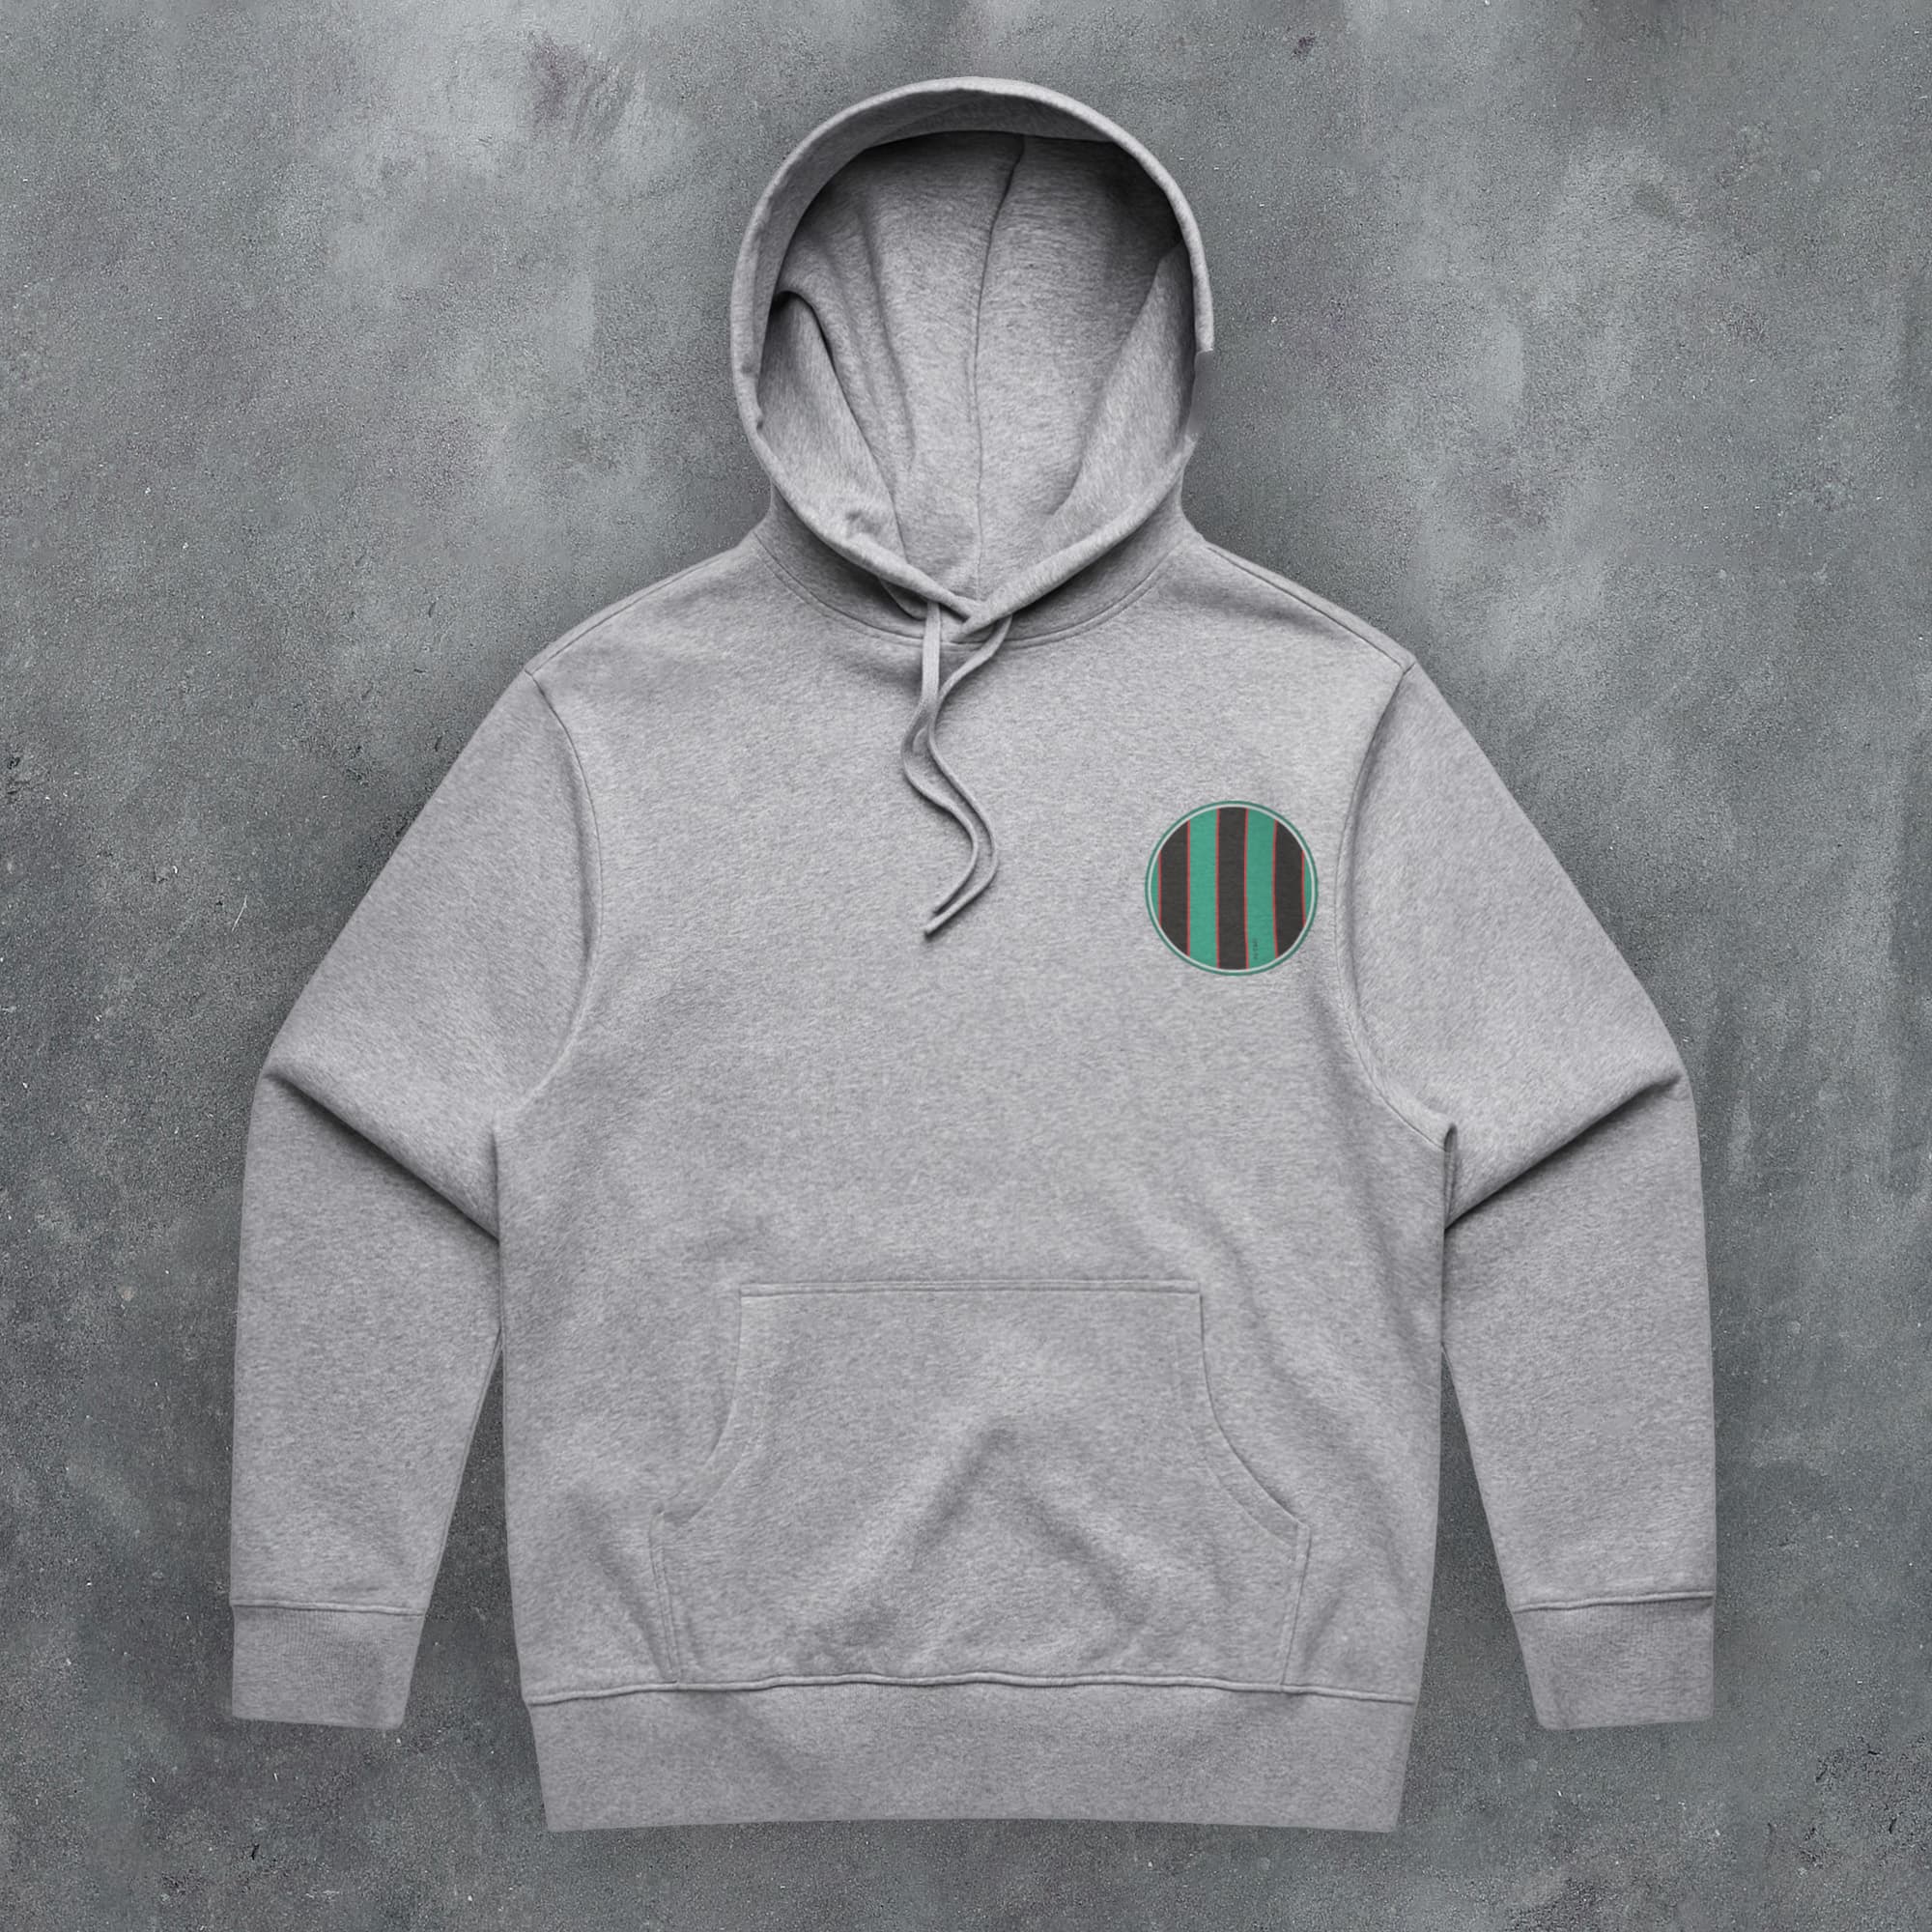 a grey hoodie with a green stripe on the front